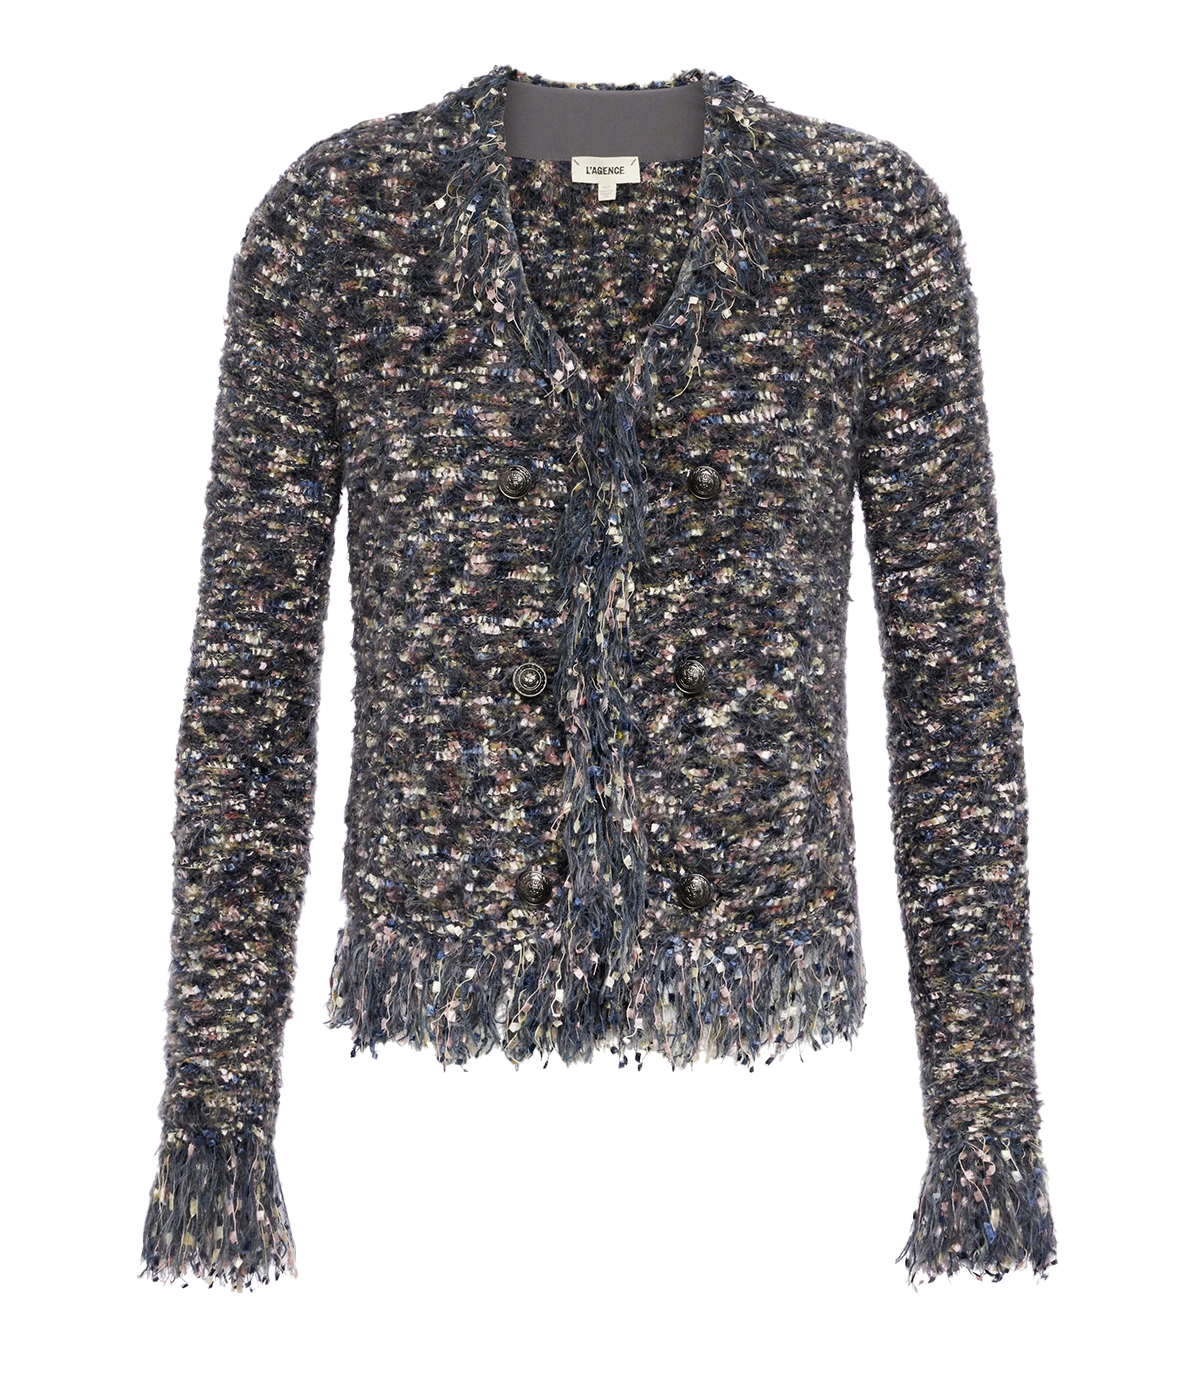 Grey longsleeve fringe and sequin cardigan by l'agence.